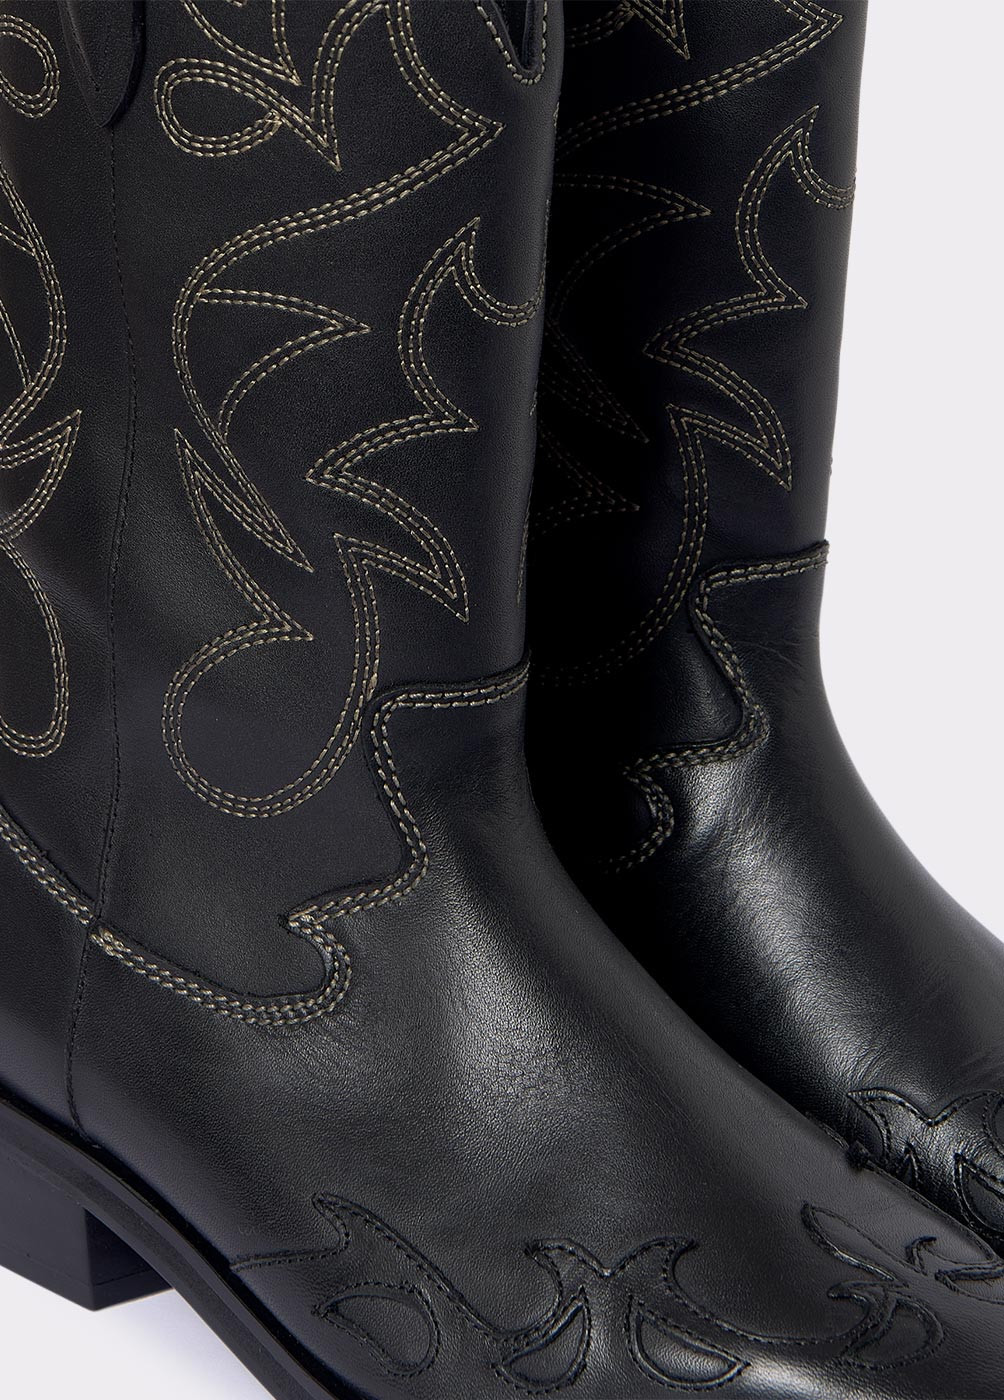 COWBOY BOOT WITH CONTRAST STITCHING